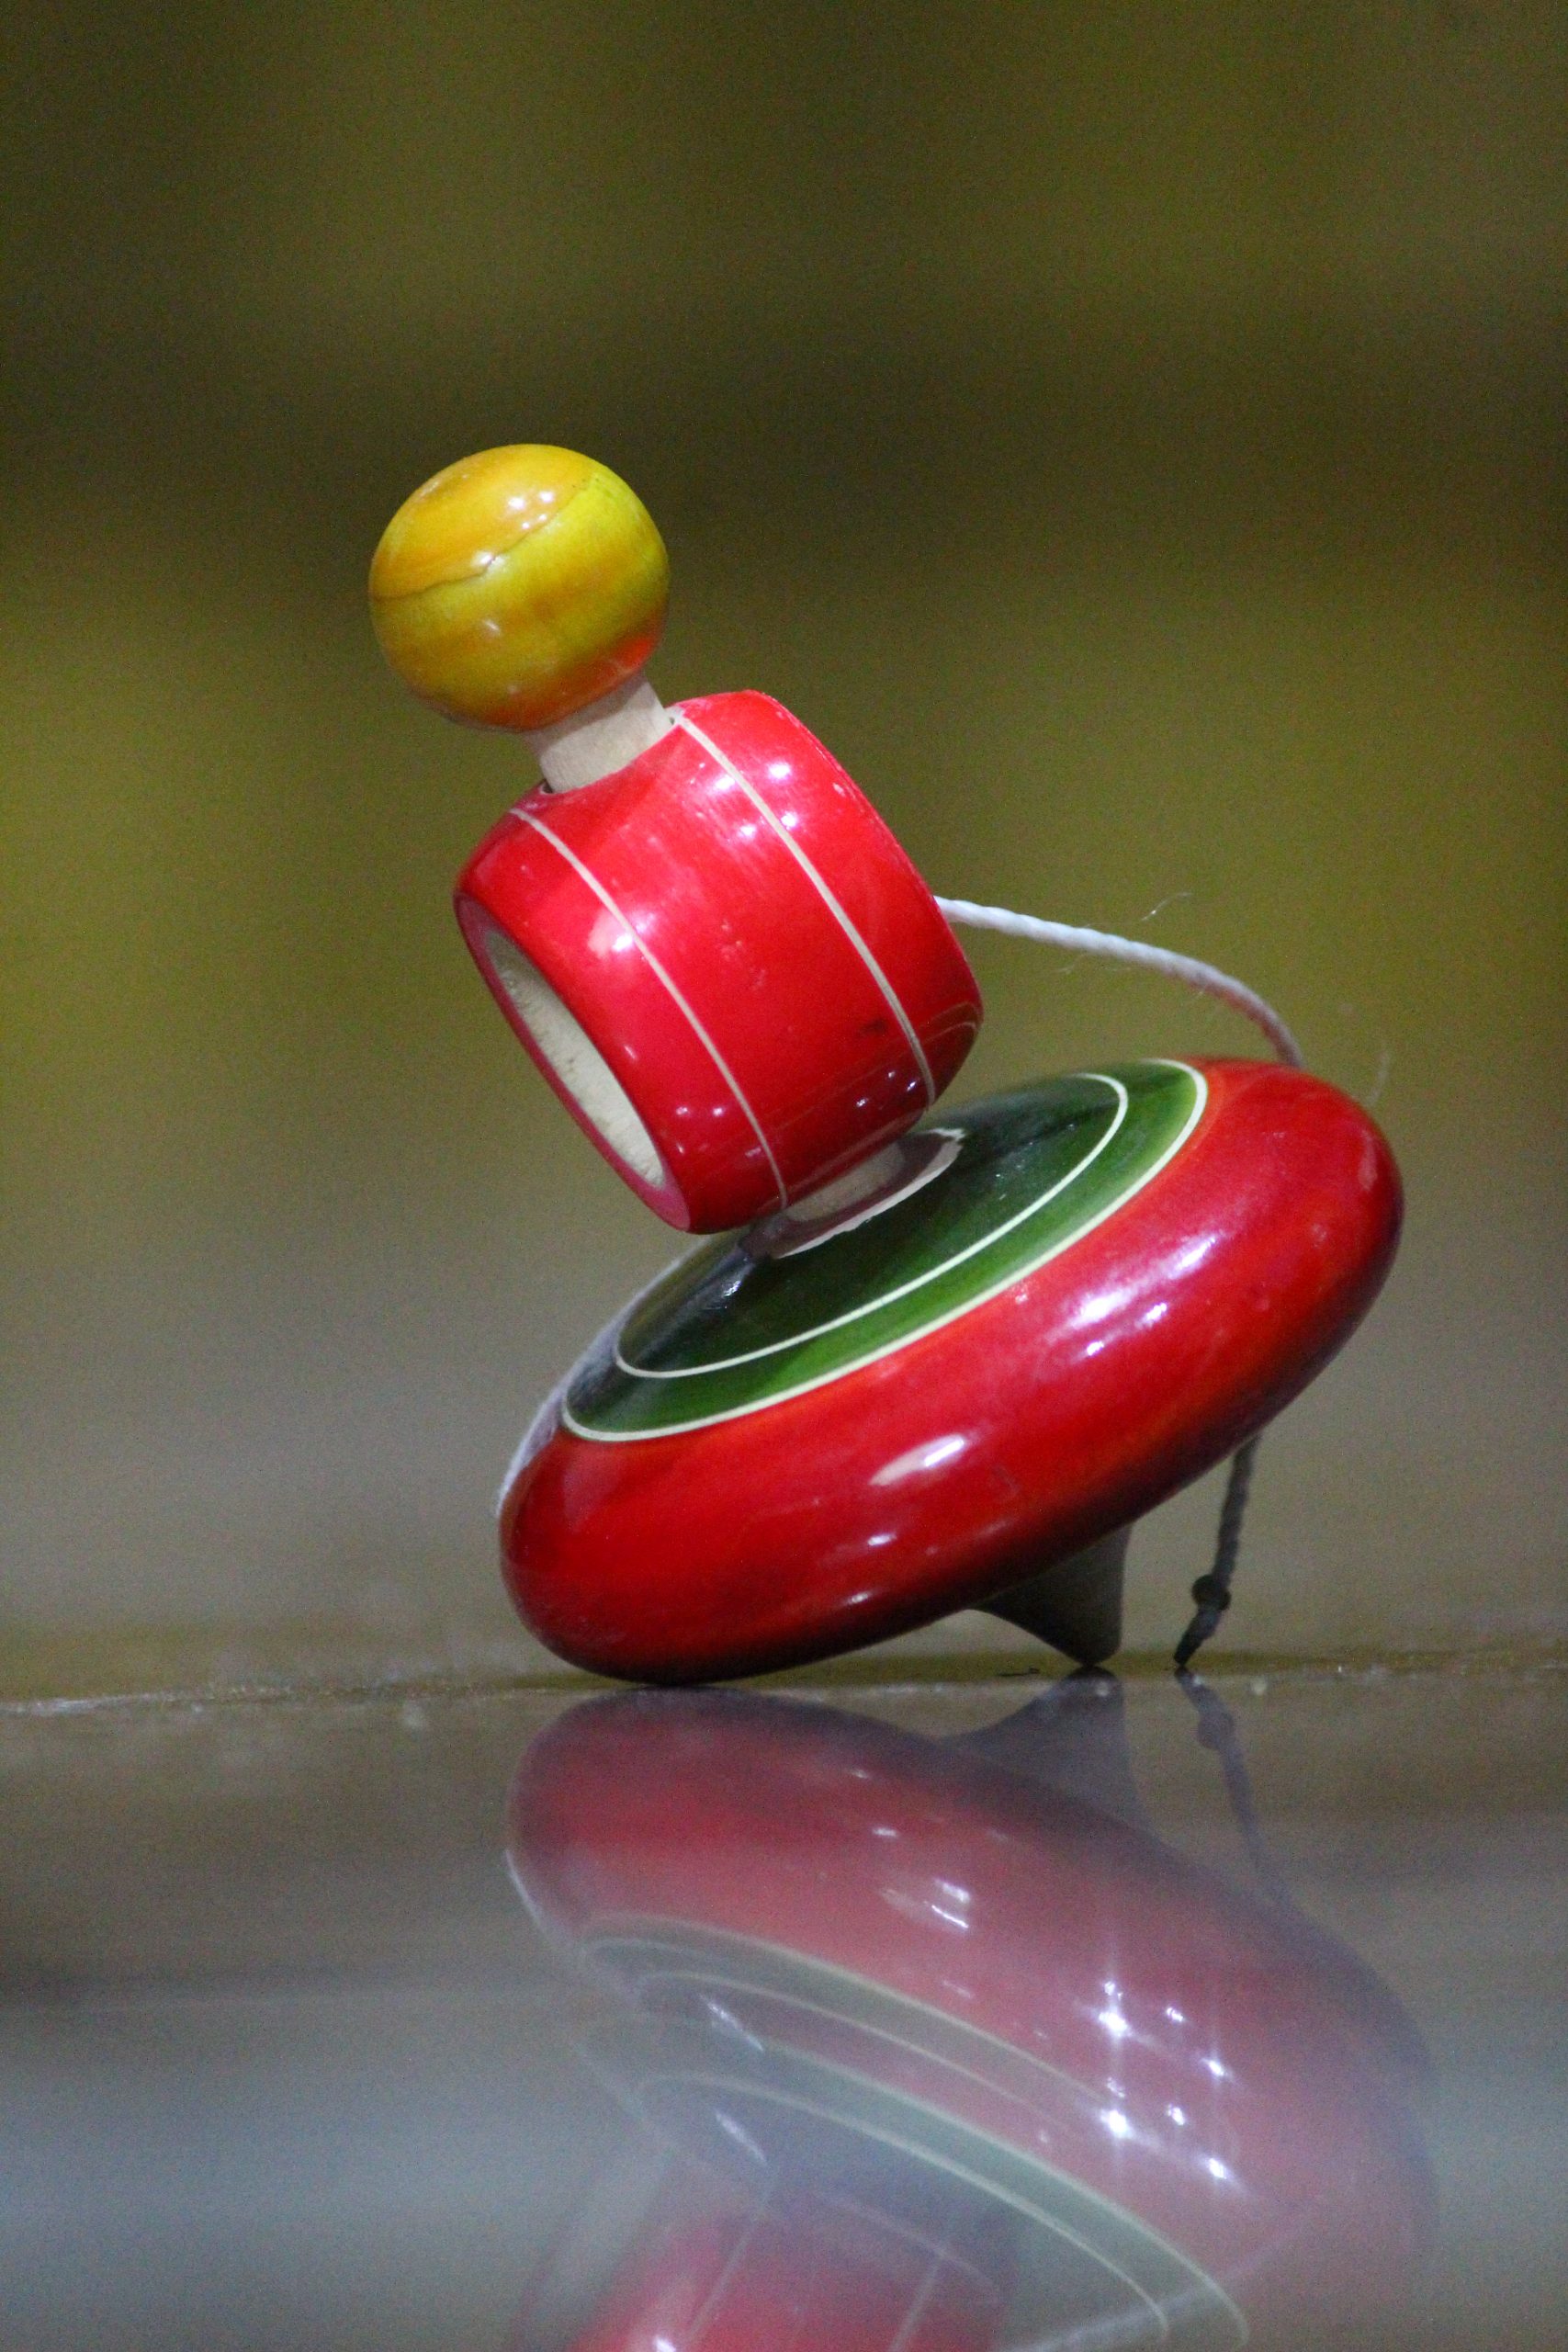 spinning top